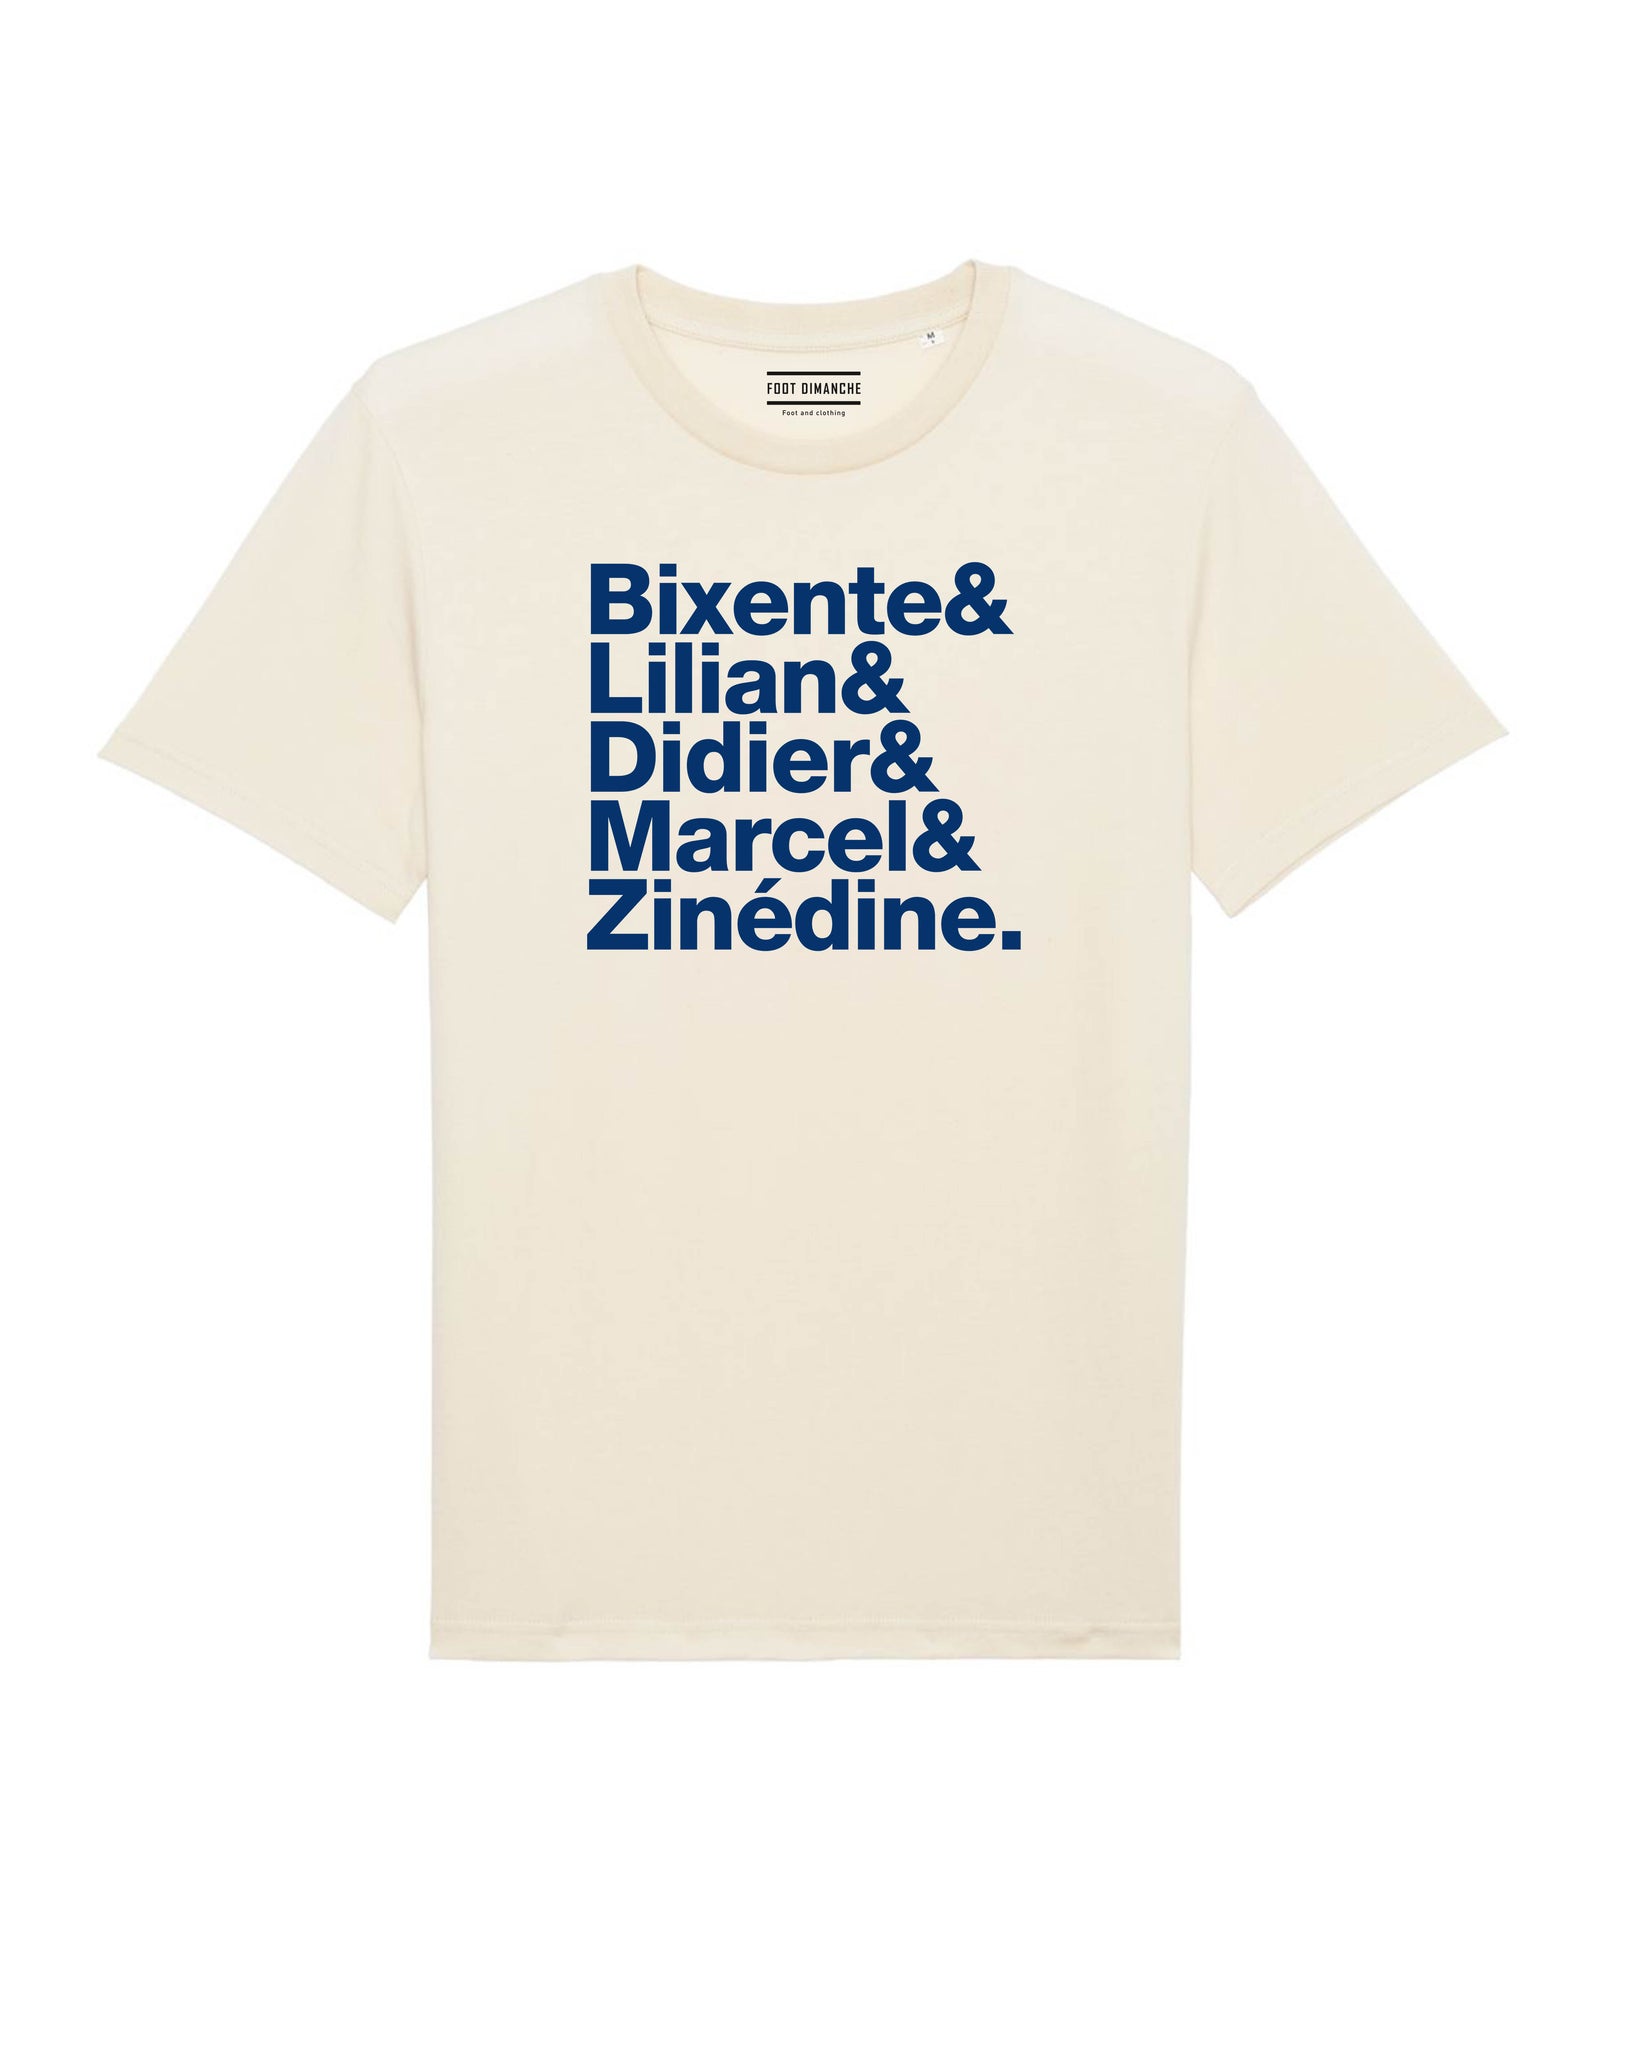 Tee Shirt France Champions 1998 - Foot Dimanche